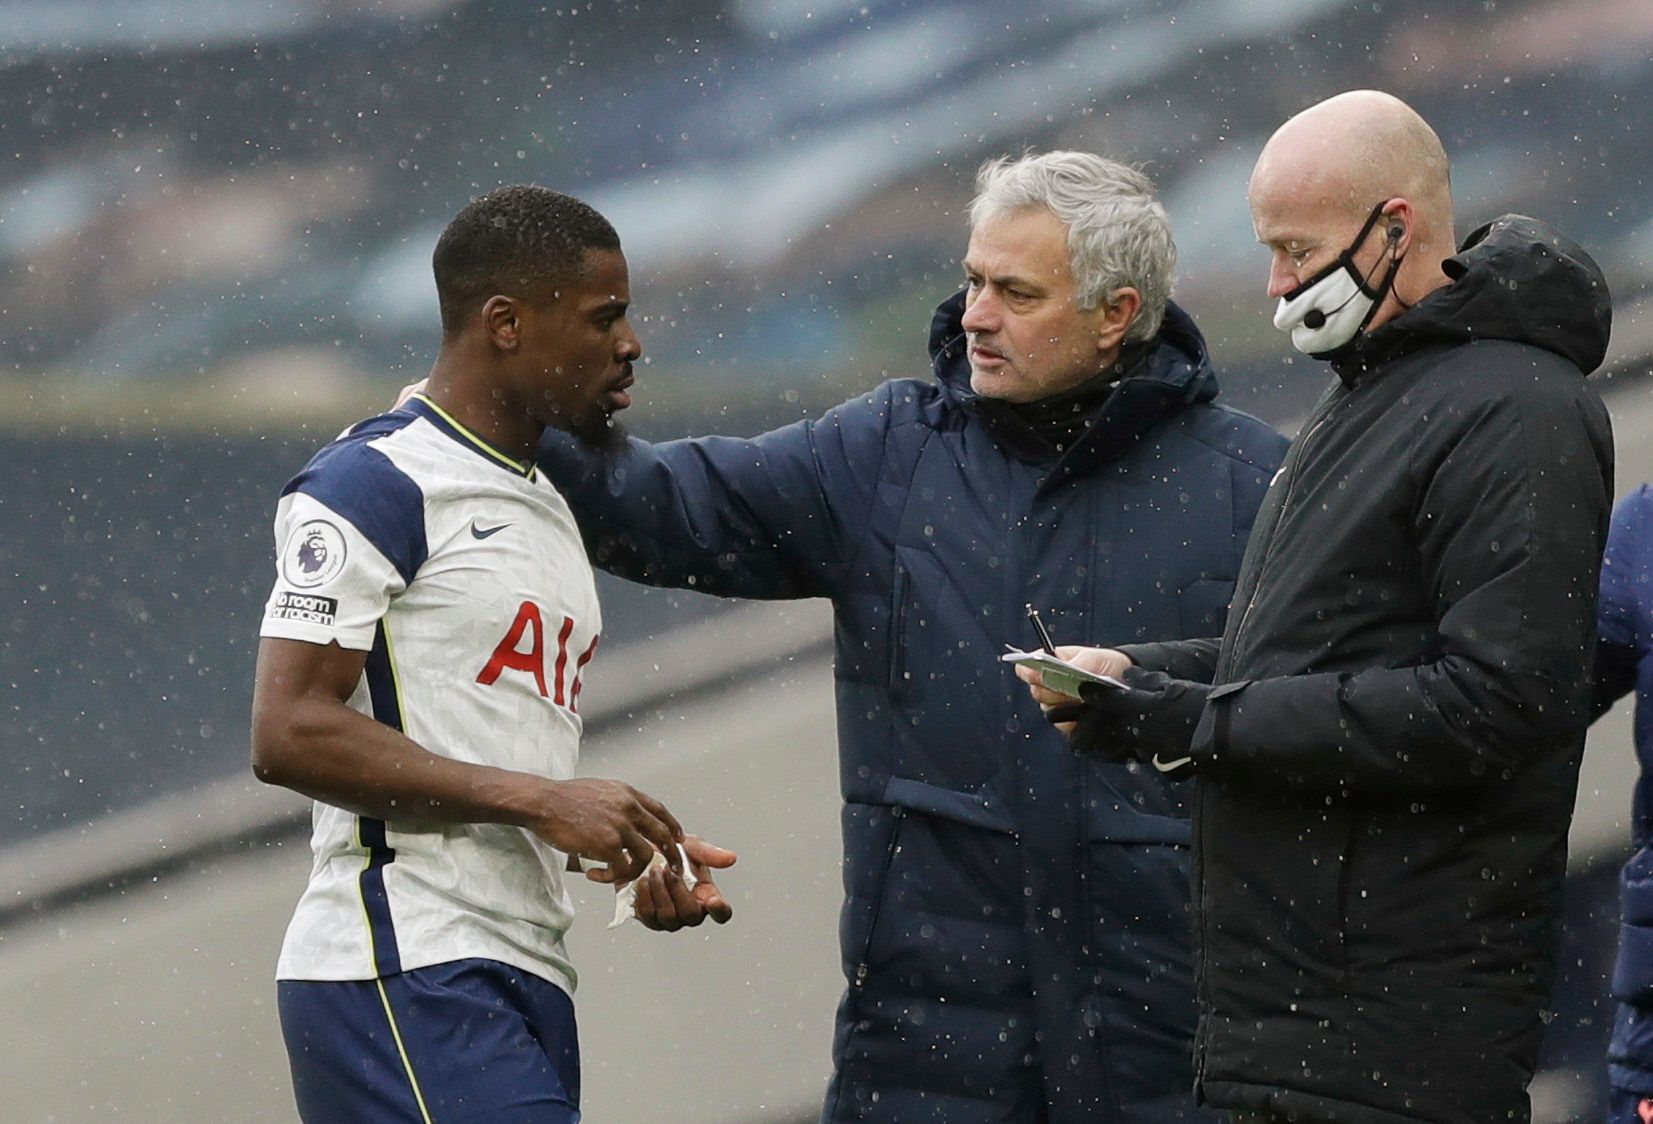 Soccer Football - Premier League - Tottenham Hotspur v West Bromwich Albion - Tottenham Hotspur Stadium, London, Britain - February 7, 2021 Tottenham Hotspur's Serge Aurier with manager Jose Mourinho after being substituted Pool via REUTERS/Matt Dunham EDITORIAL USE ONLY. No use with unauthorized audio, video, data, fixture lists, club/league logos or 'live' services. Online in-match use limited to 75 images, no video emulation. No use in betting, games or single club /league/player publications